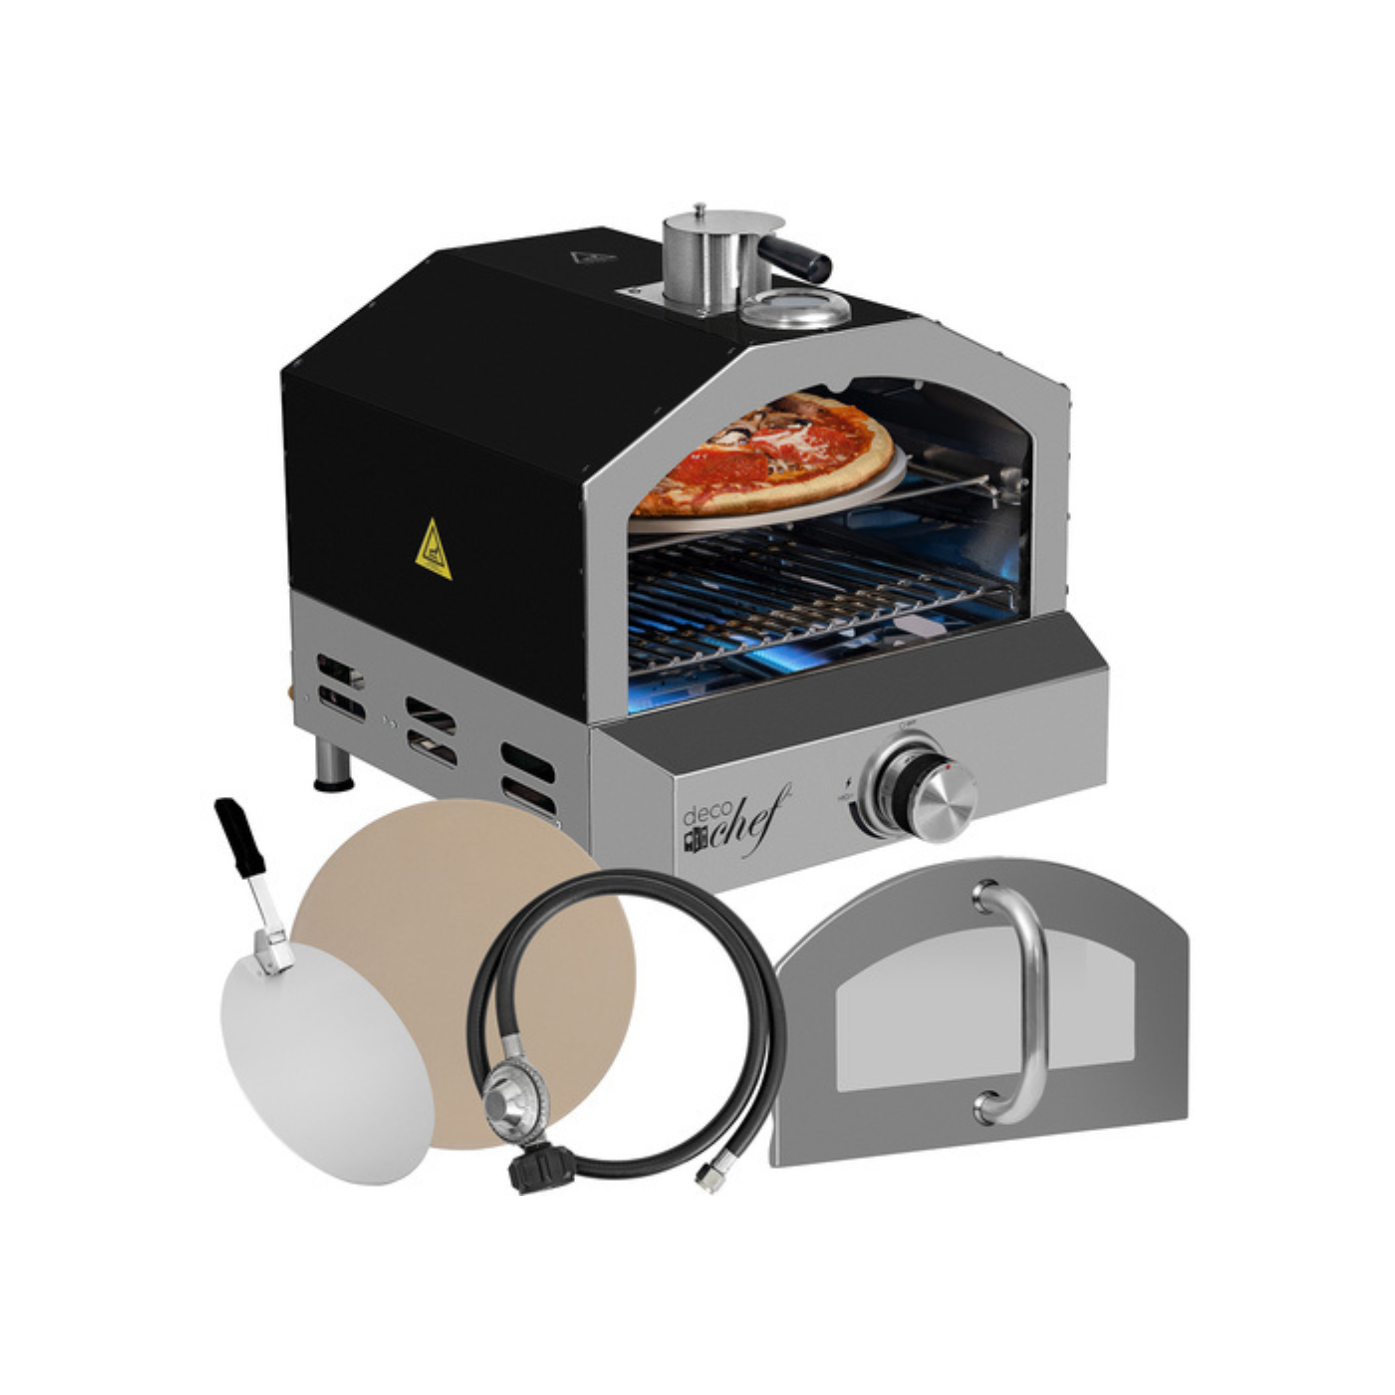 Deco Chef 2-in-1 Portable Outdoor Pizza Oven & Grill: Pellet